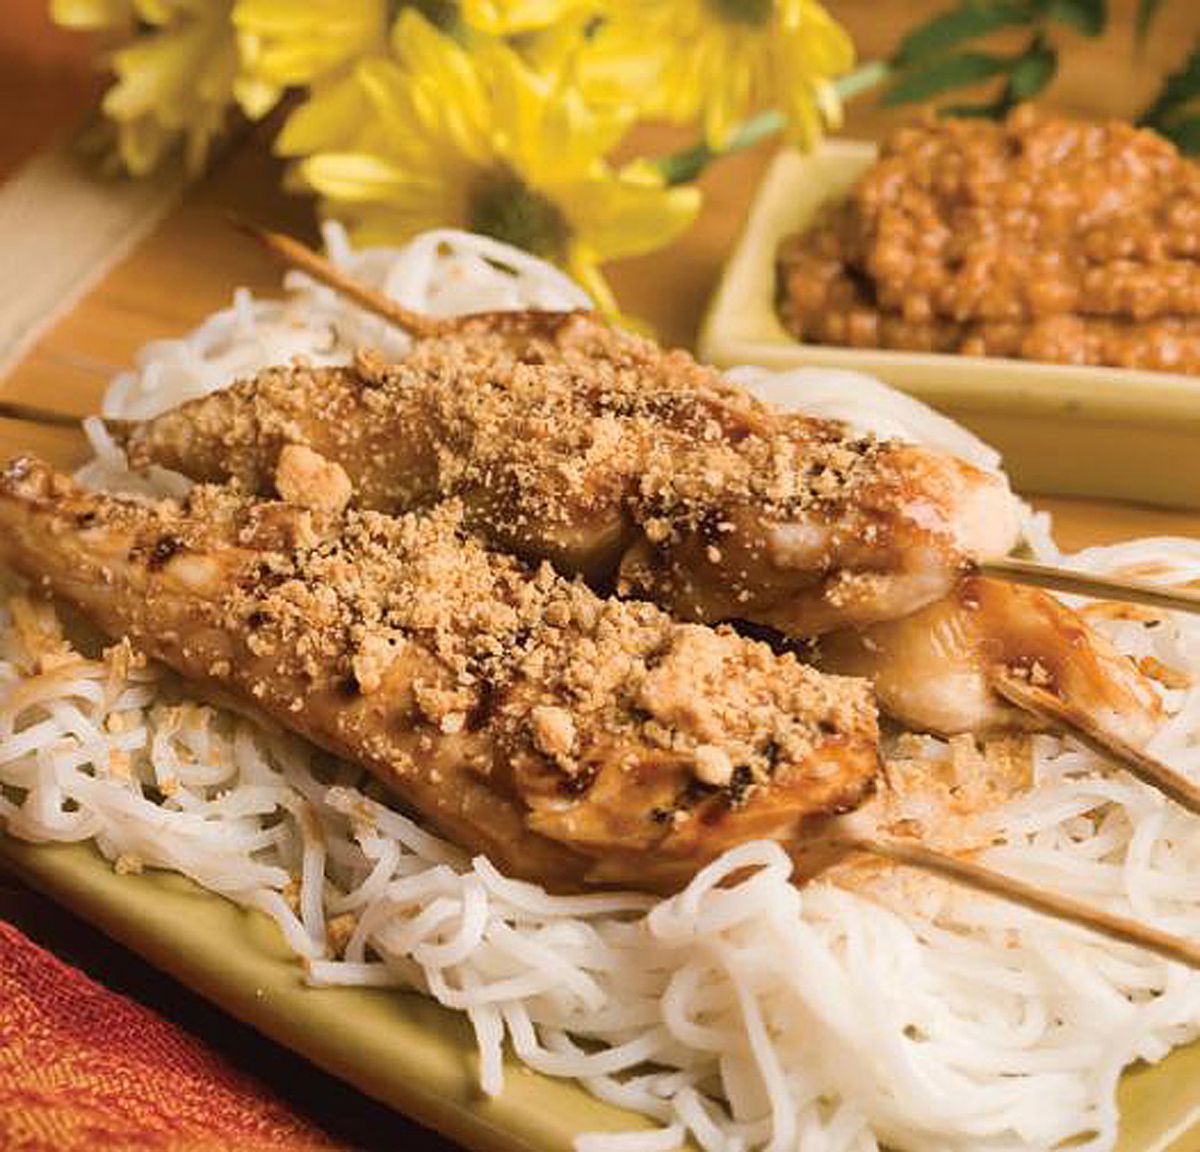 Do-Si-Dos  Girl Scout cookies are used in this recipe for  Peanut Thai Chicken. McClatchy Tribune (McClatchy Tribune / Newport News Daily Press)